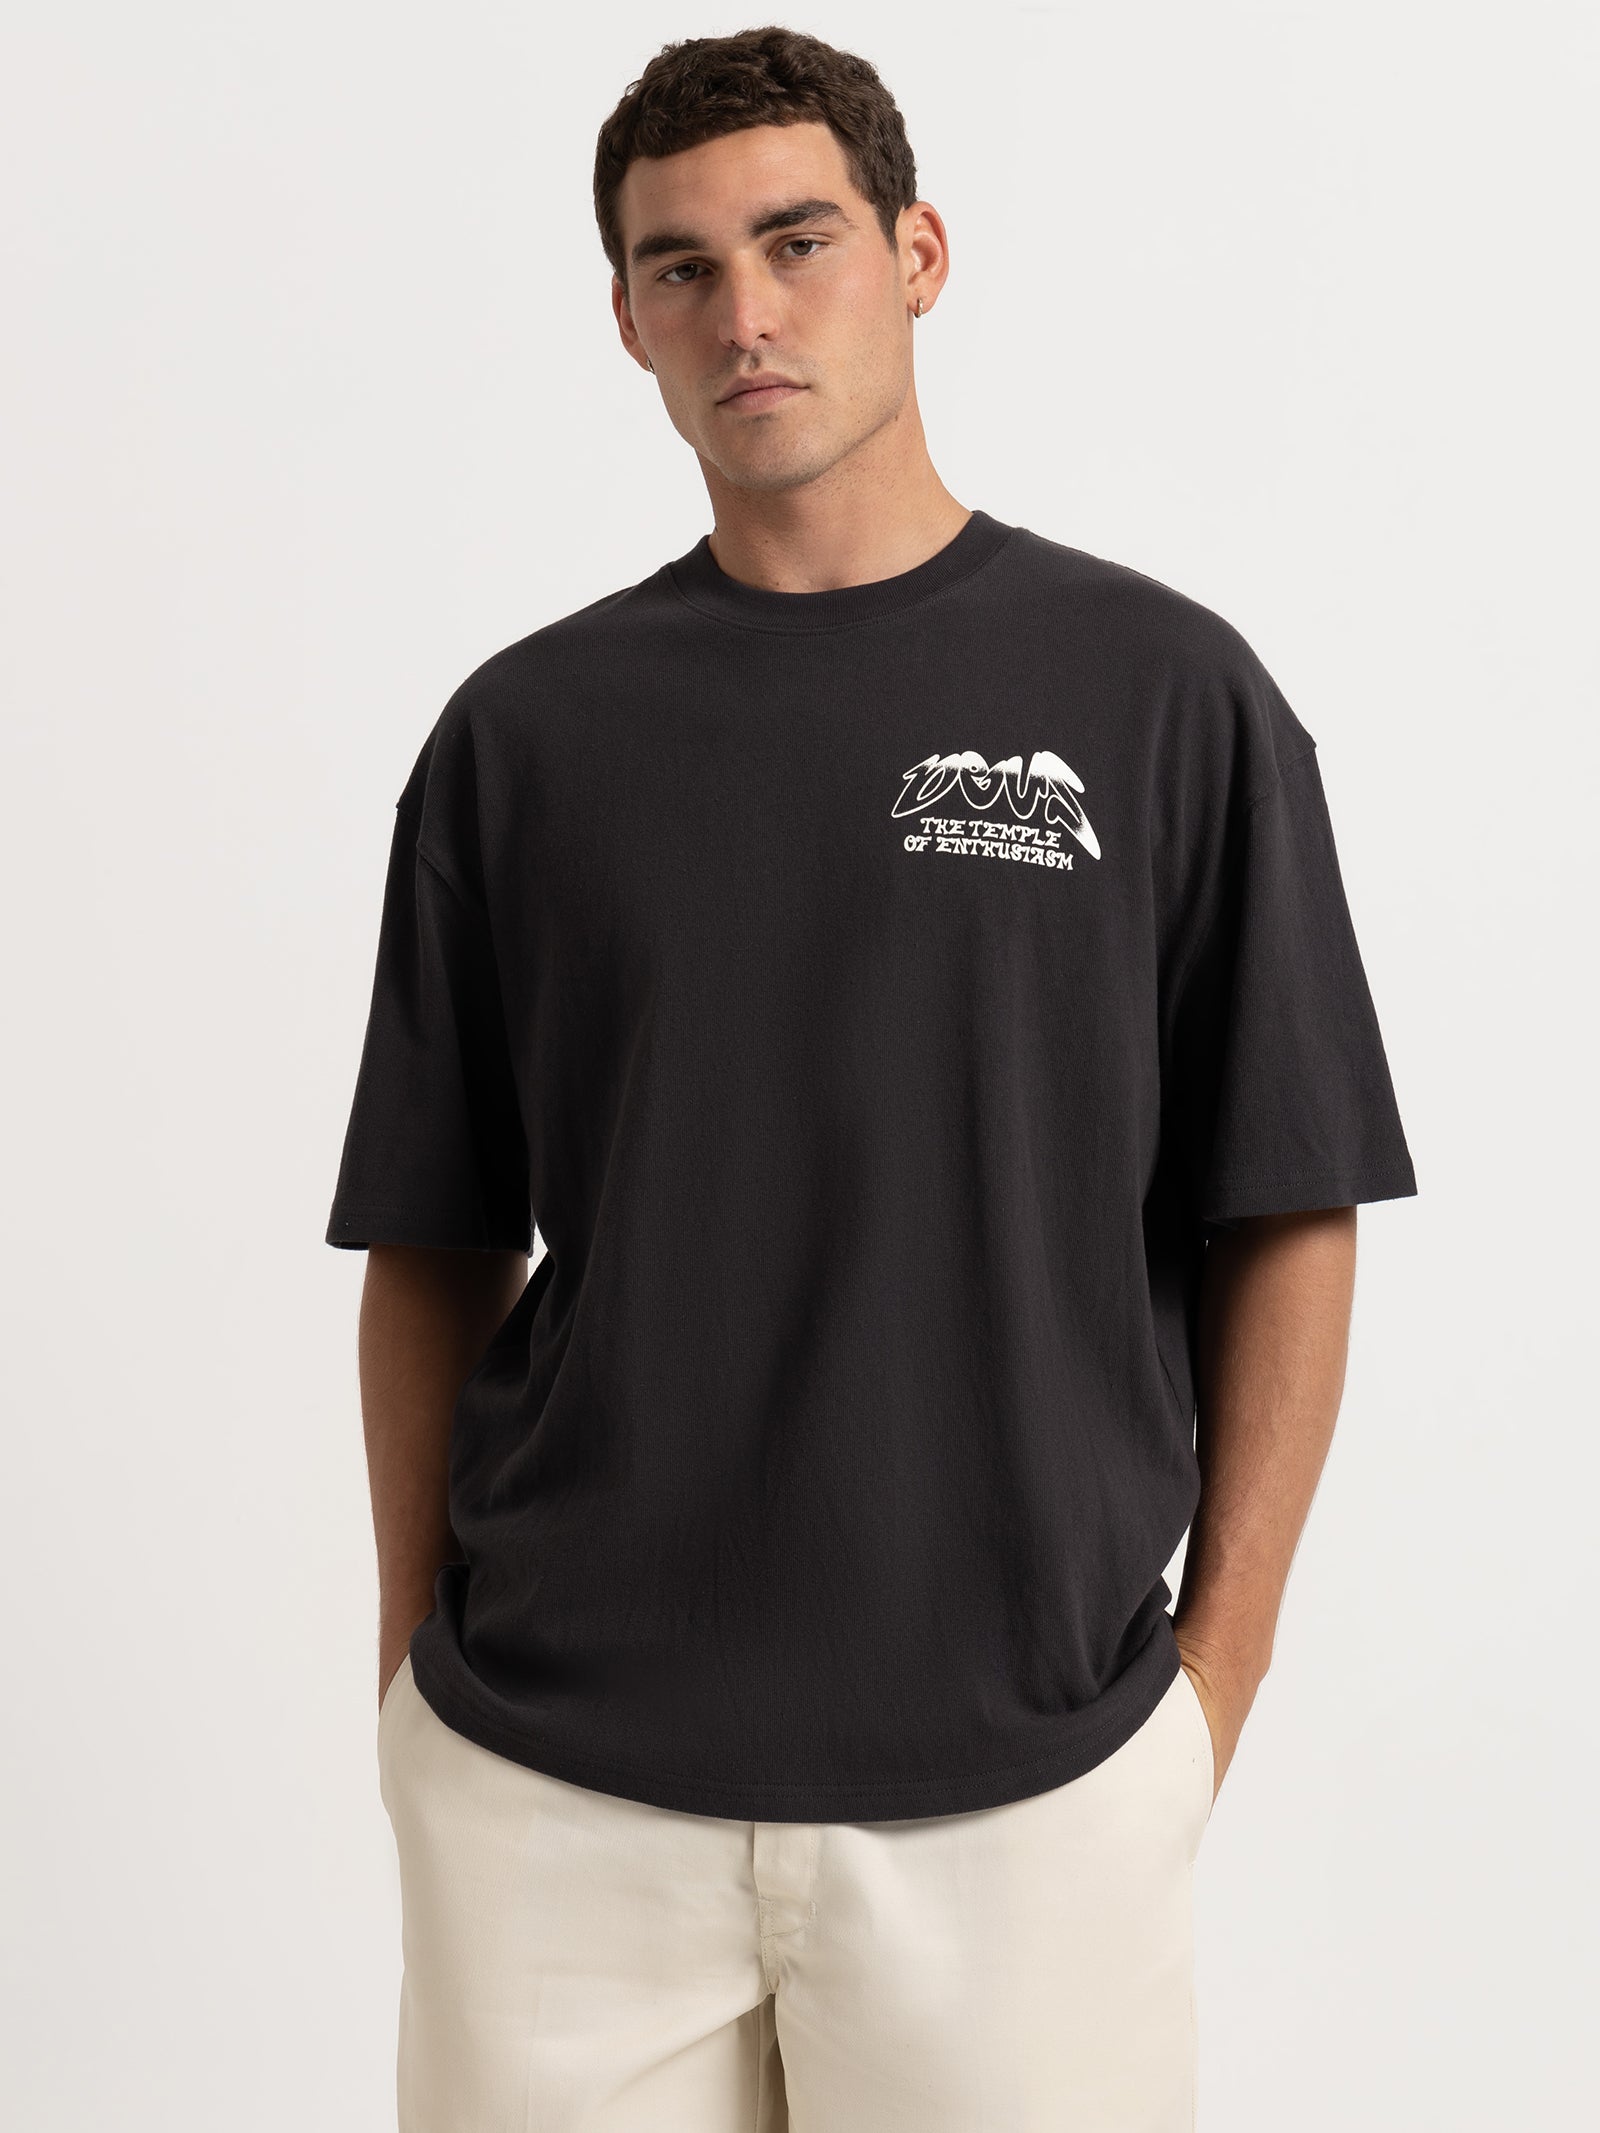 Temple T-Shirt in Anthracite